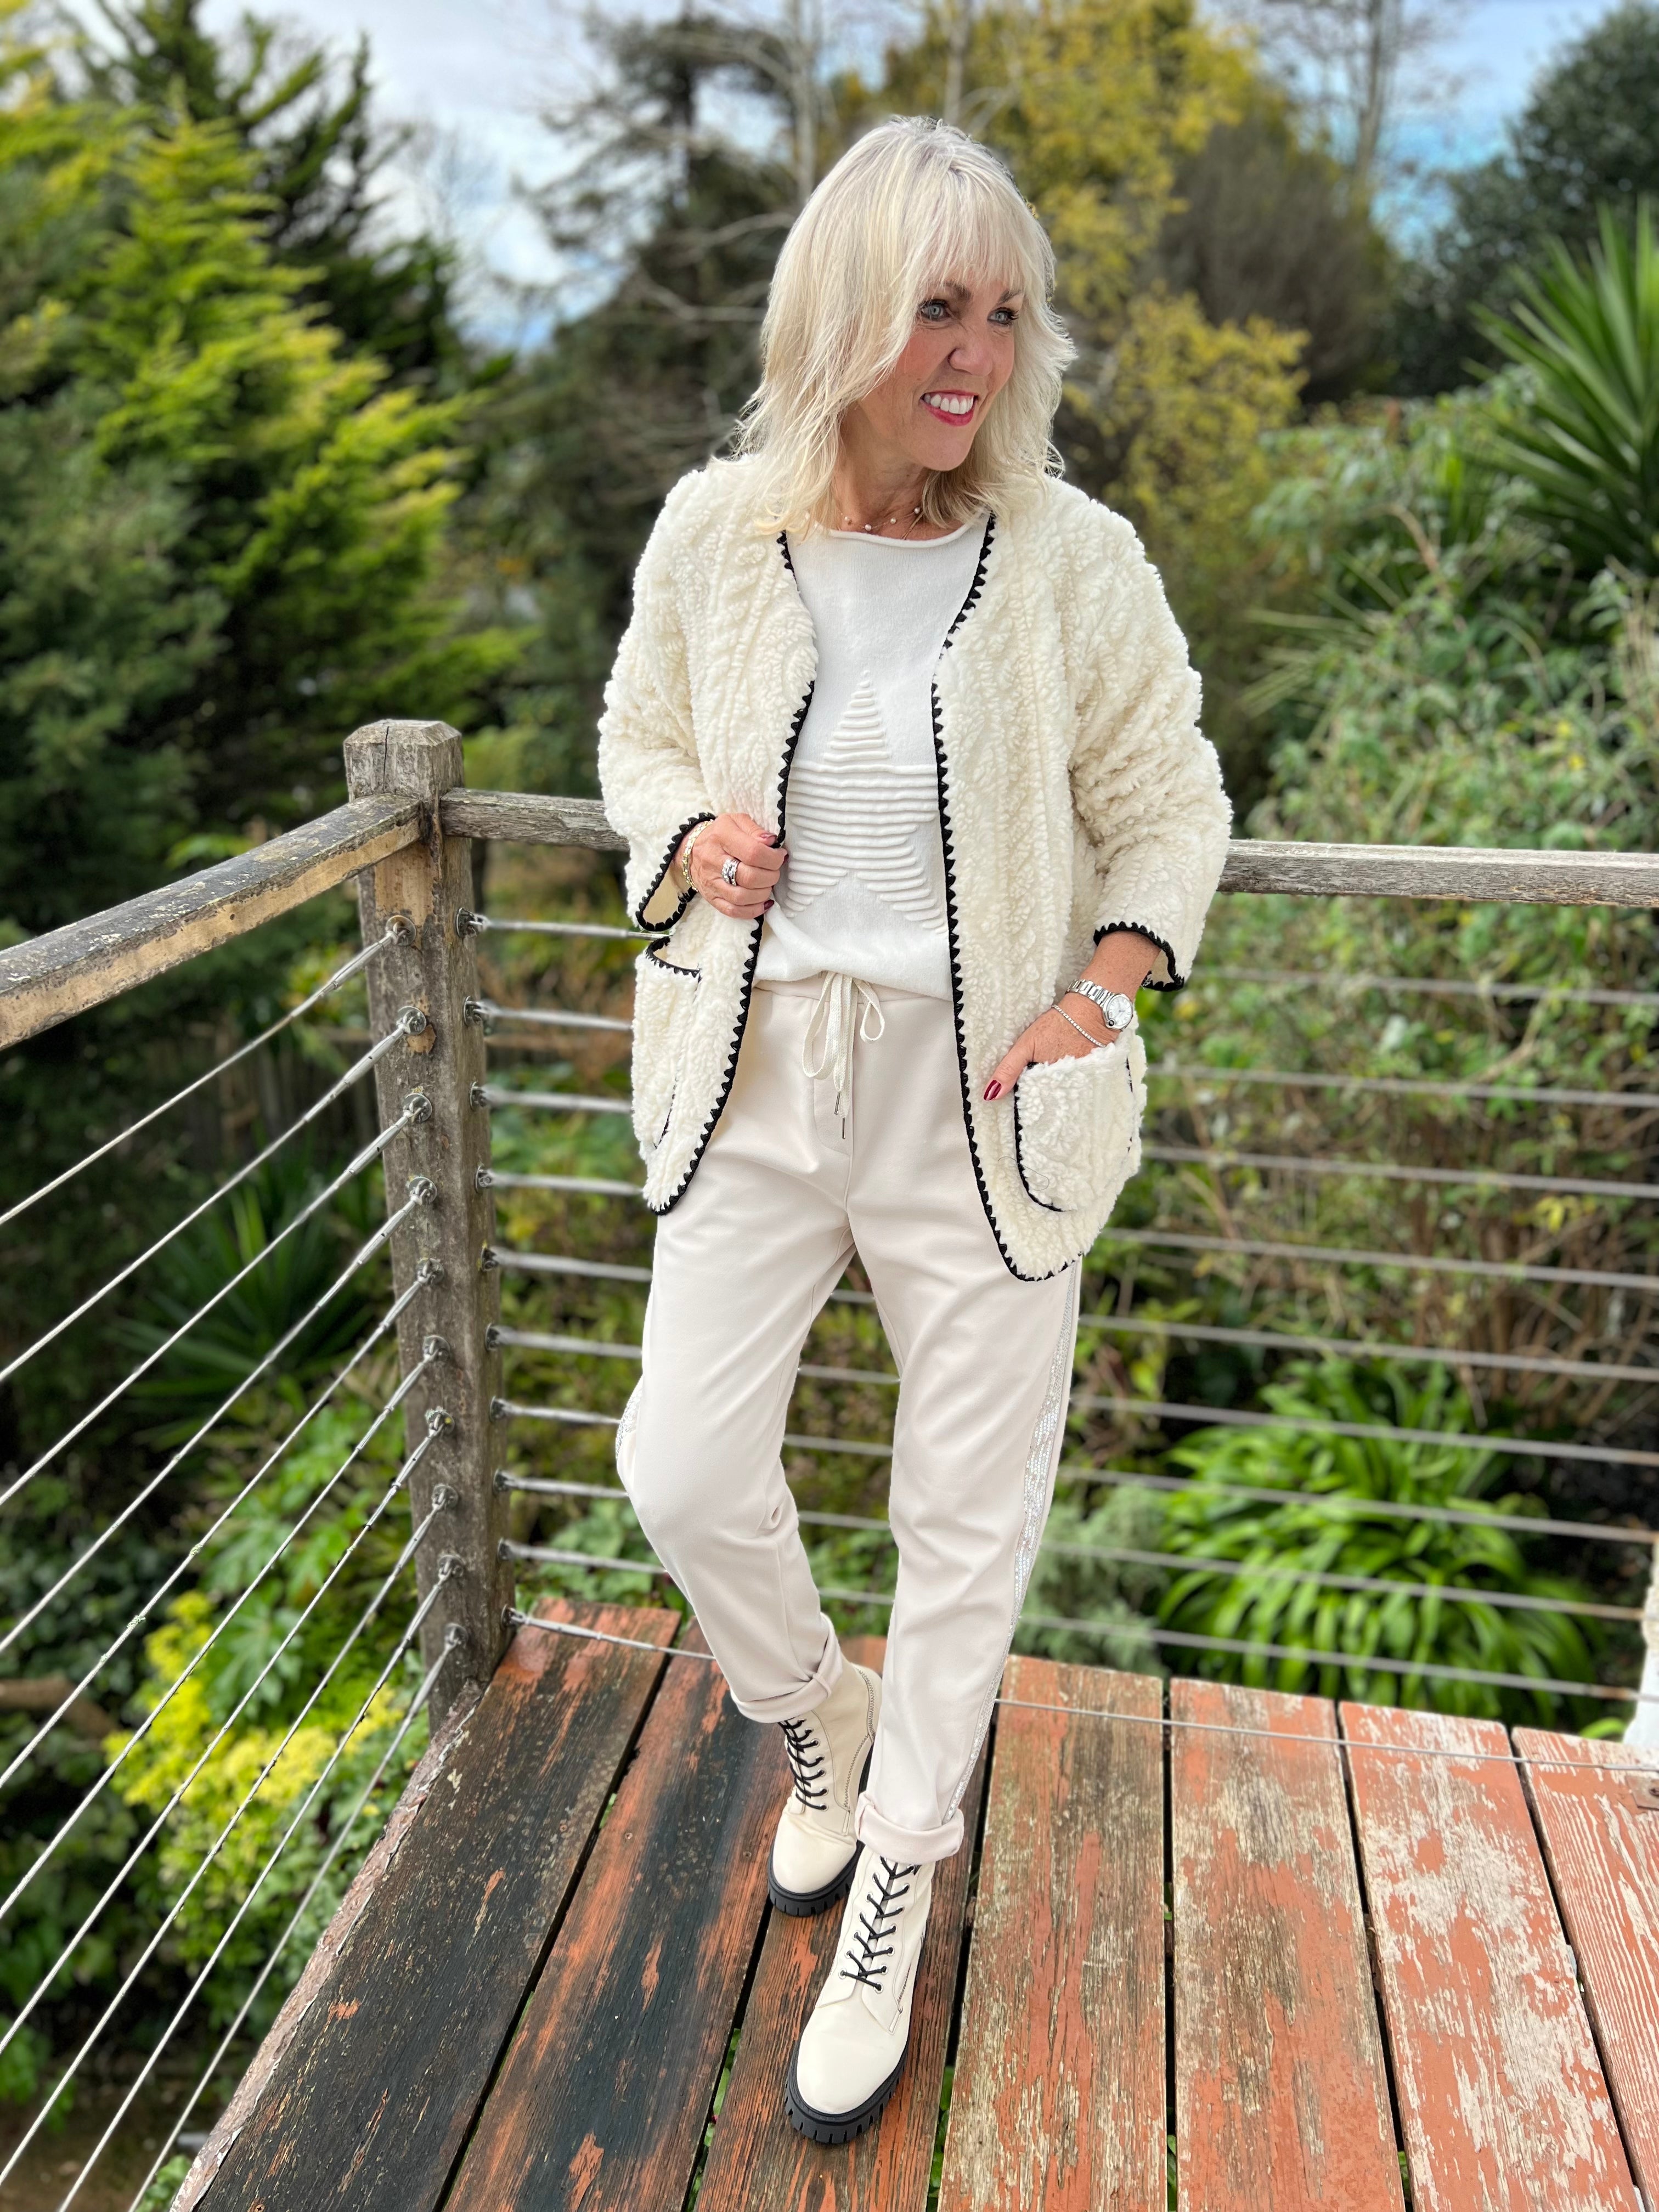 Soft Trousers with Sequin Stripe in Light Stone